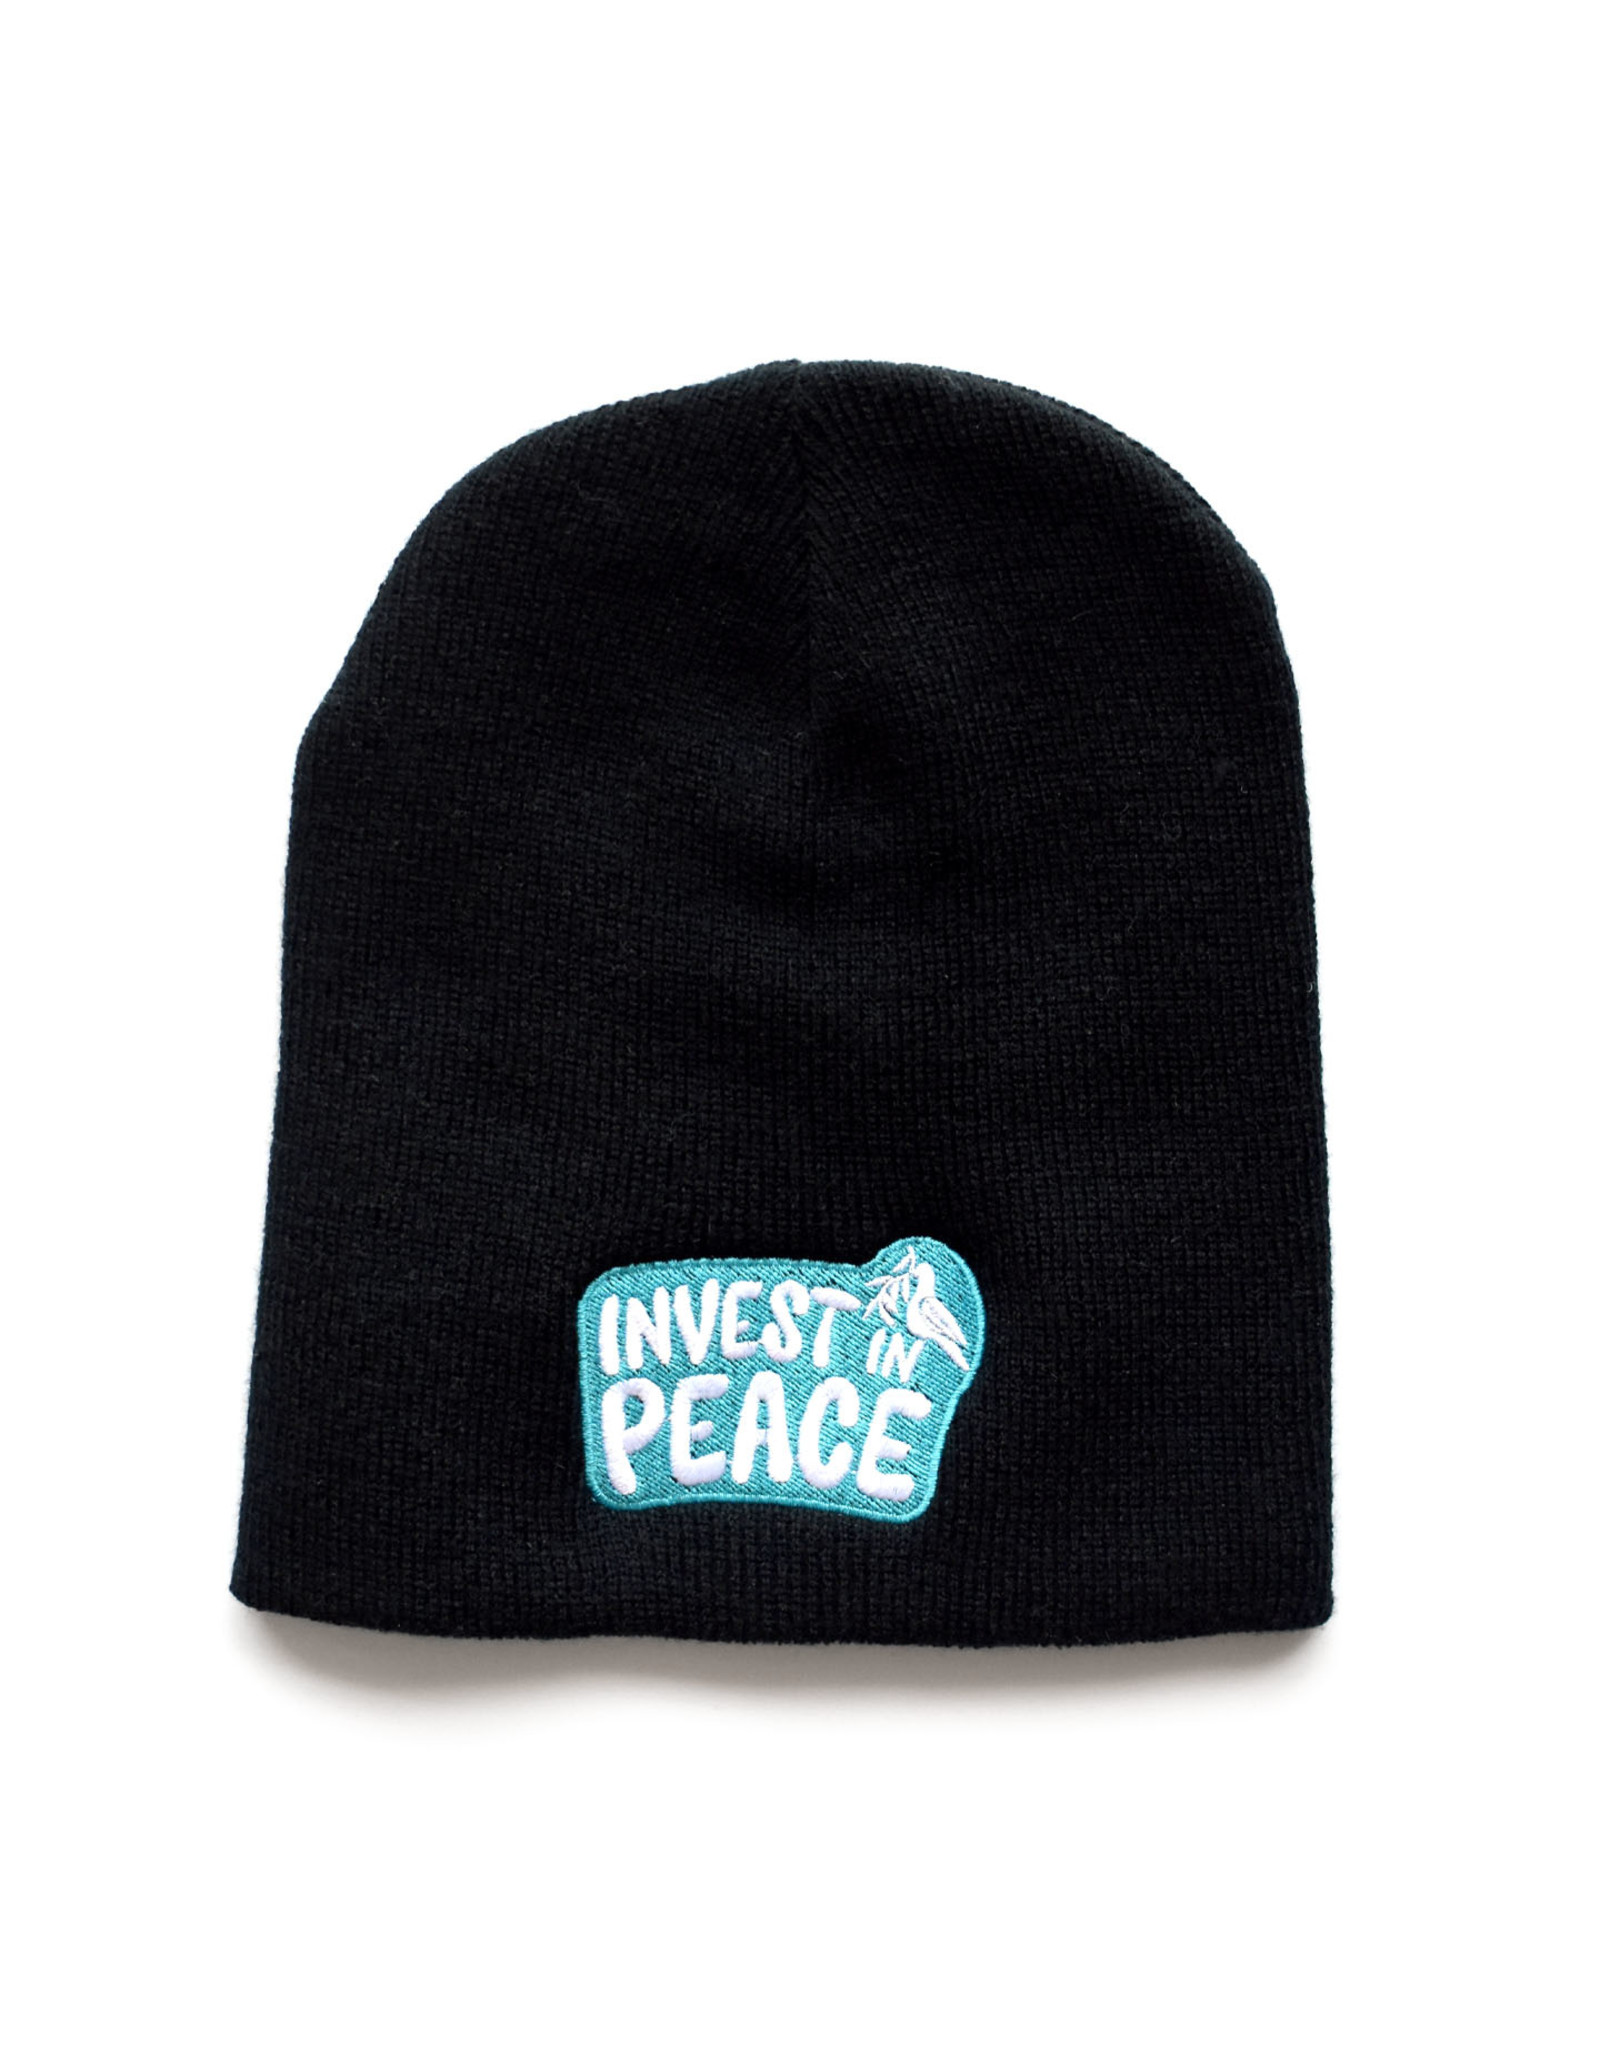 Invest in Peace Beanie